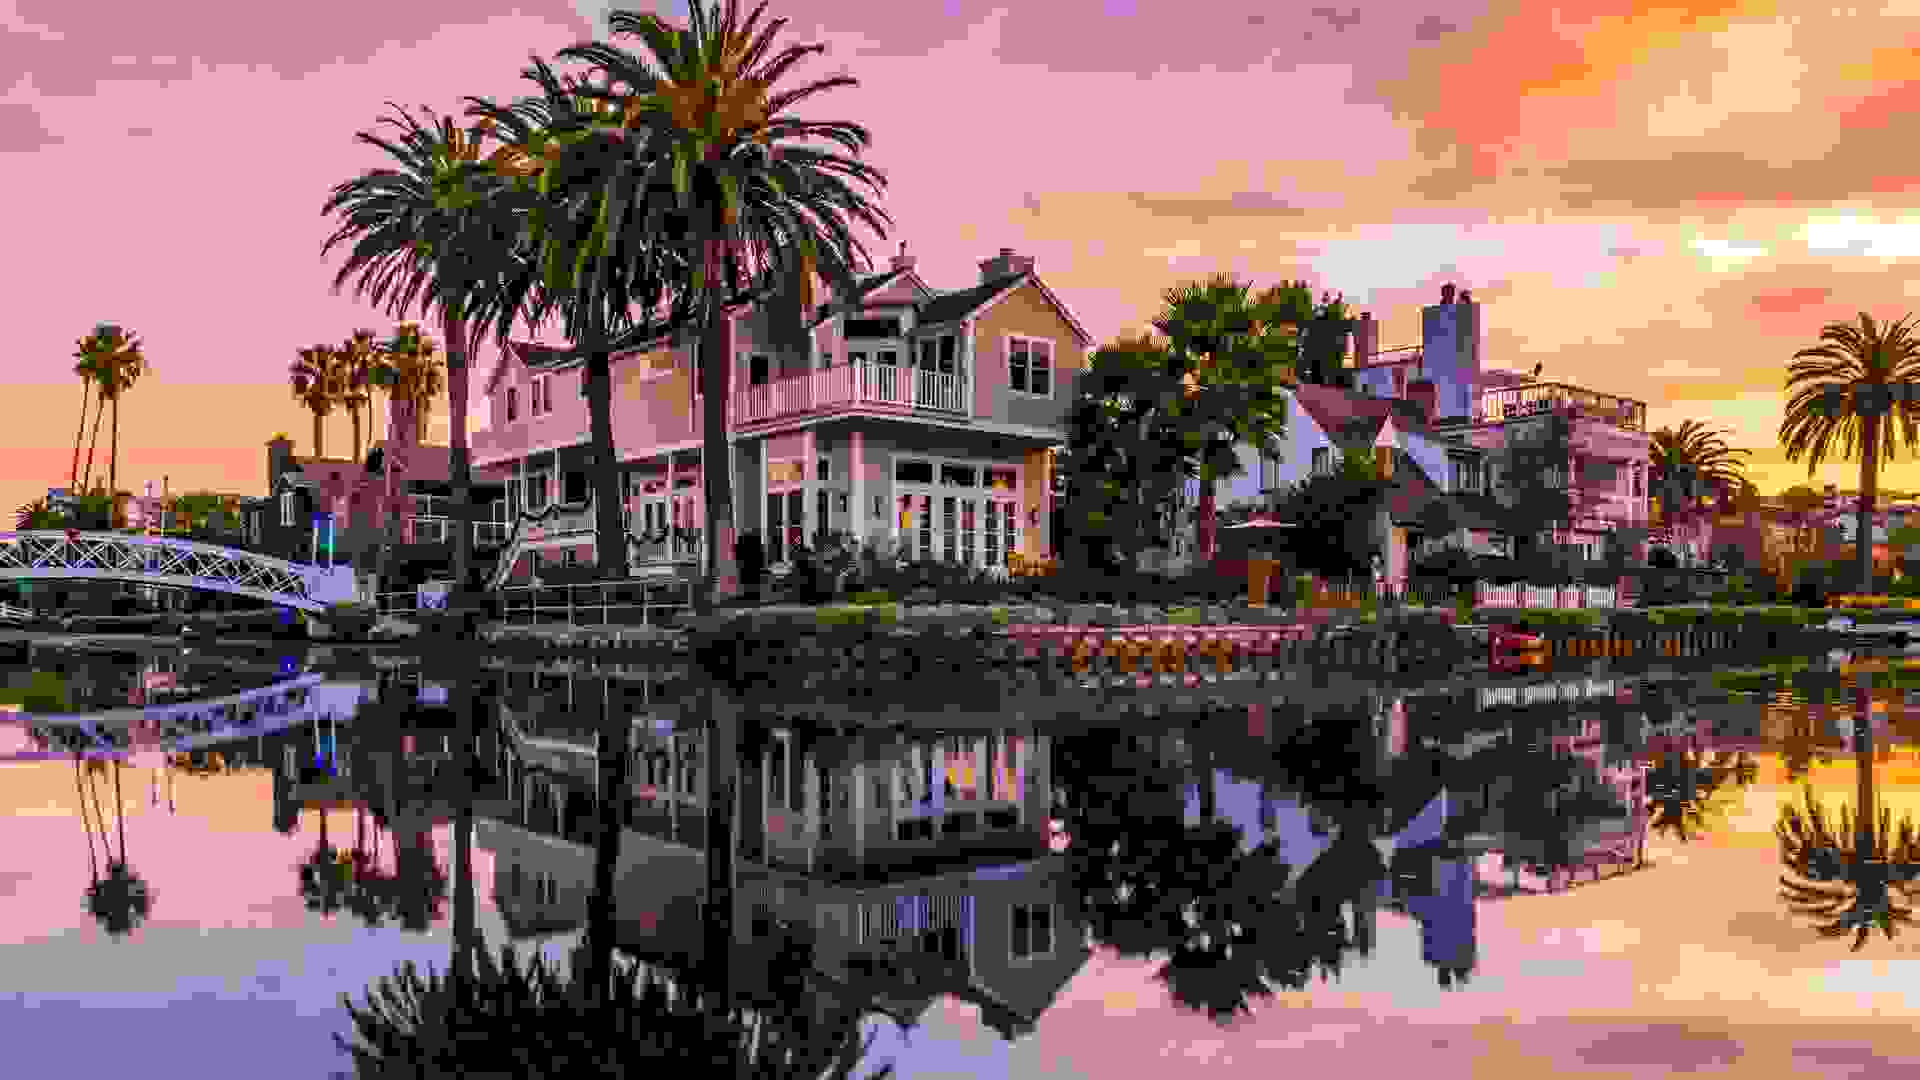 House at the Venice Canals.